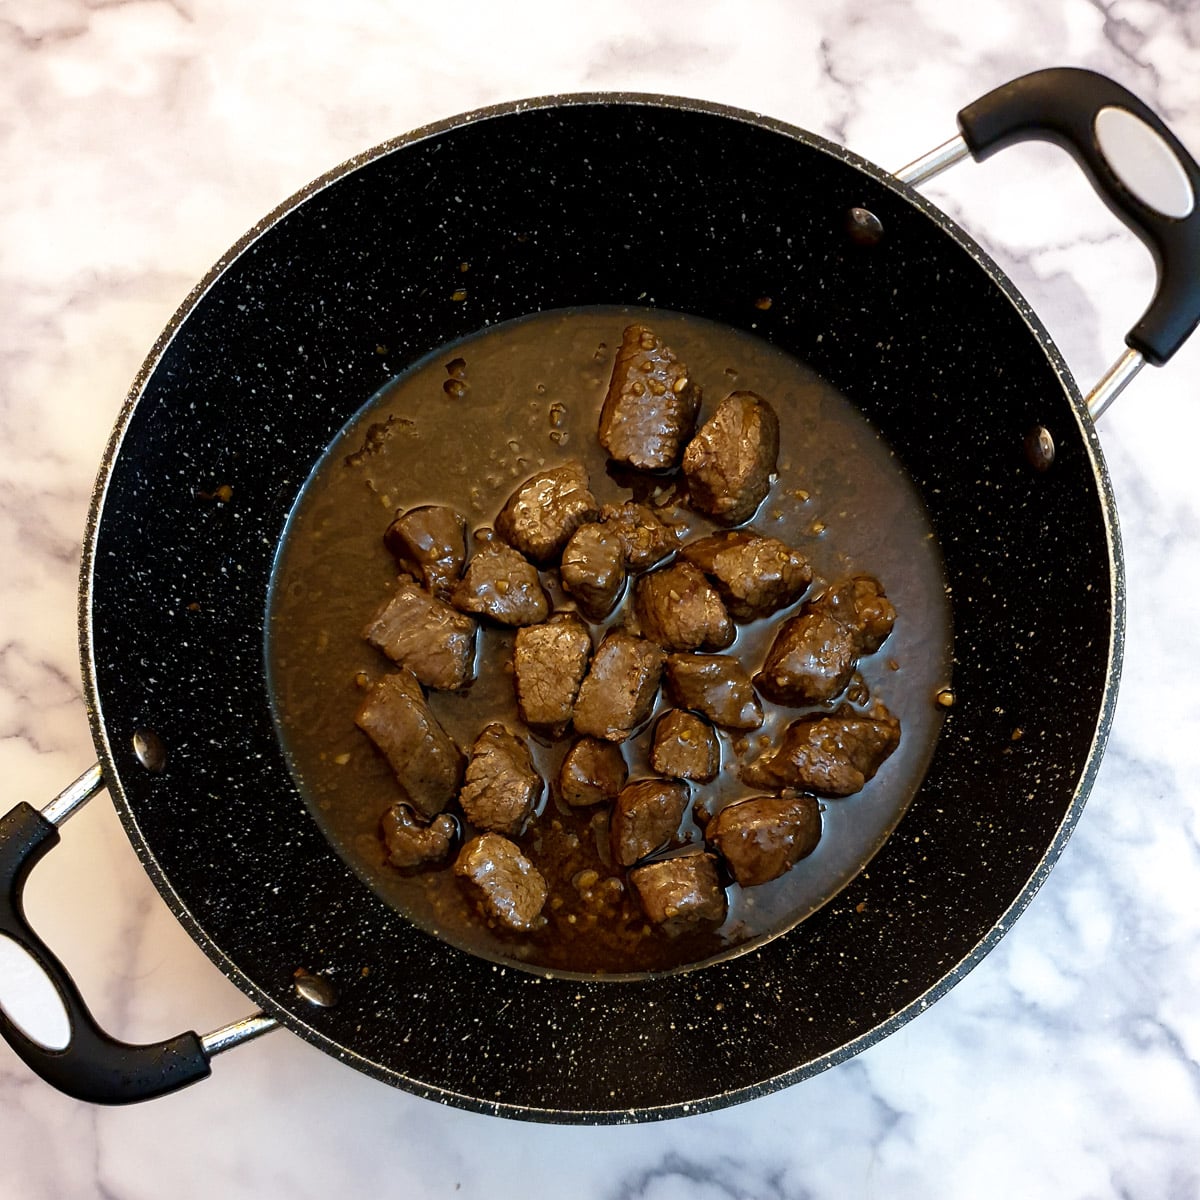 Cubes of steak mixed with sauce in a frying pan.